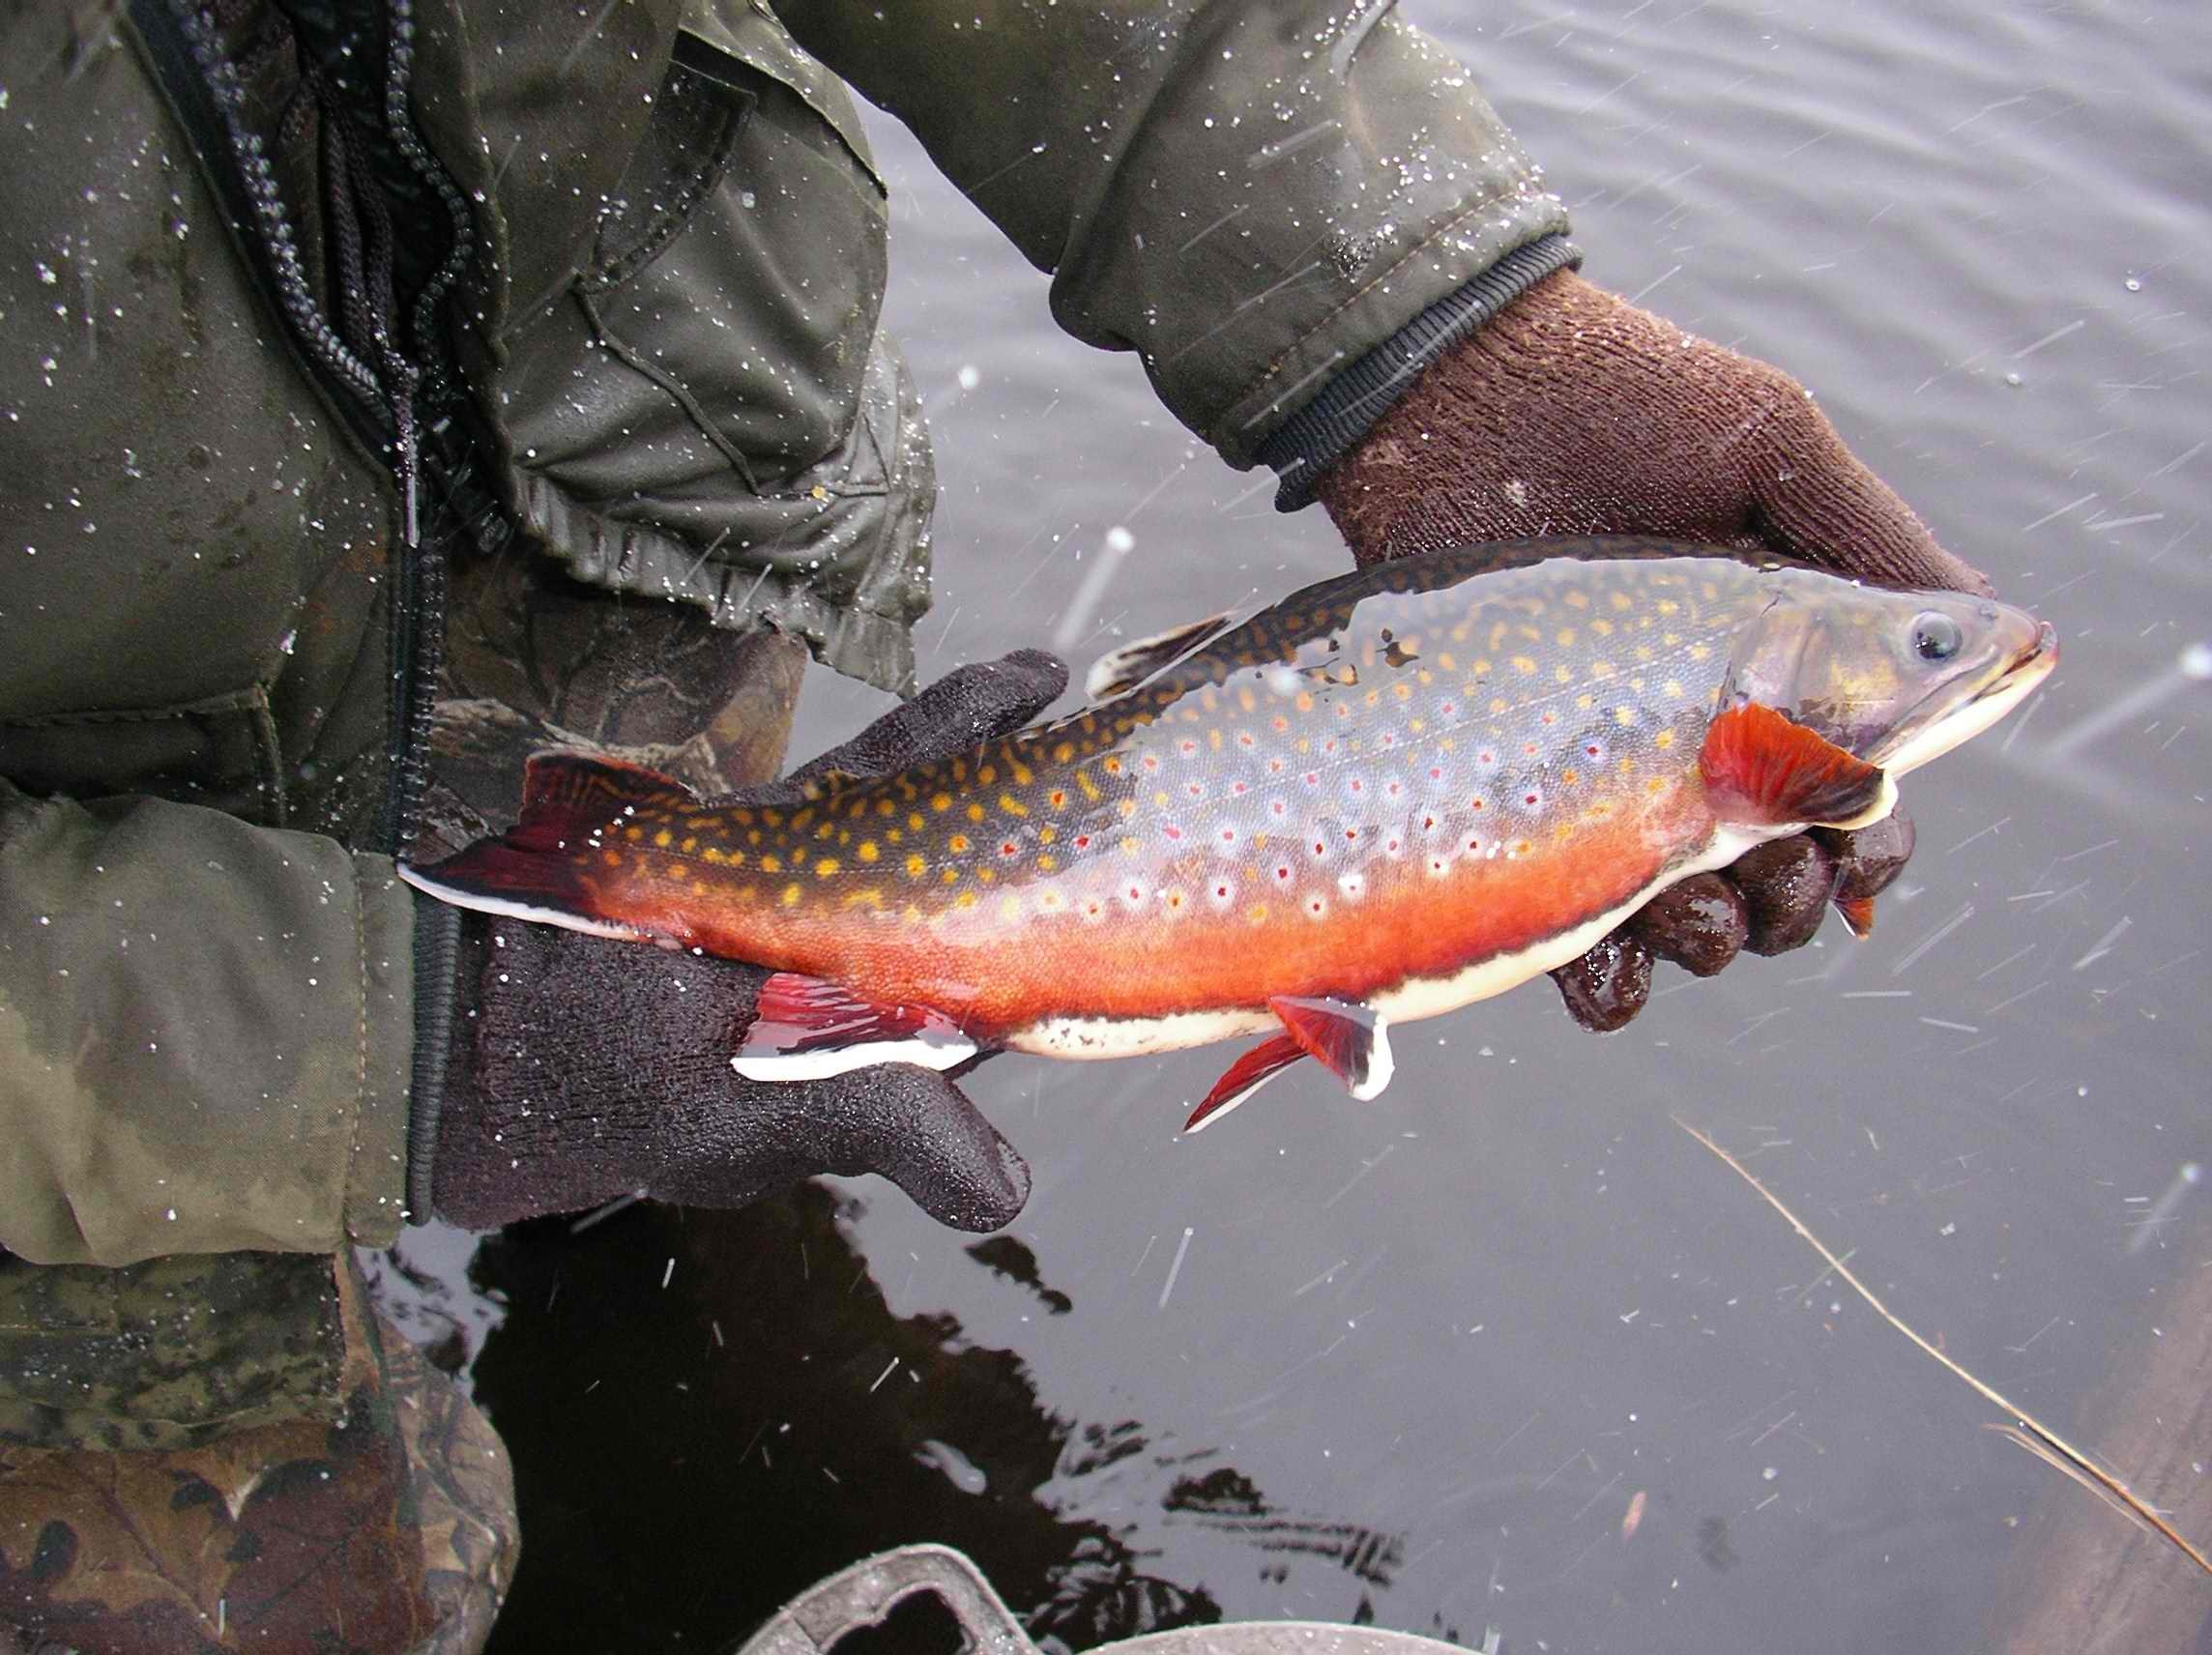  Brook trout are a beautiful native fish of the Adirondacks.